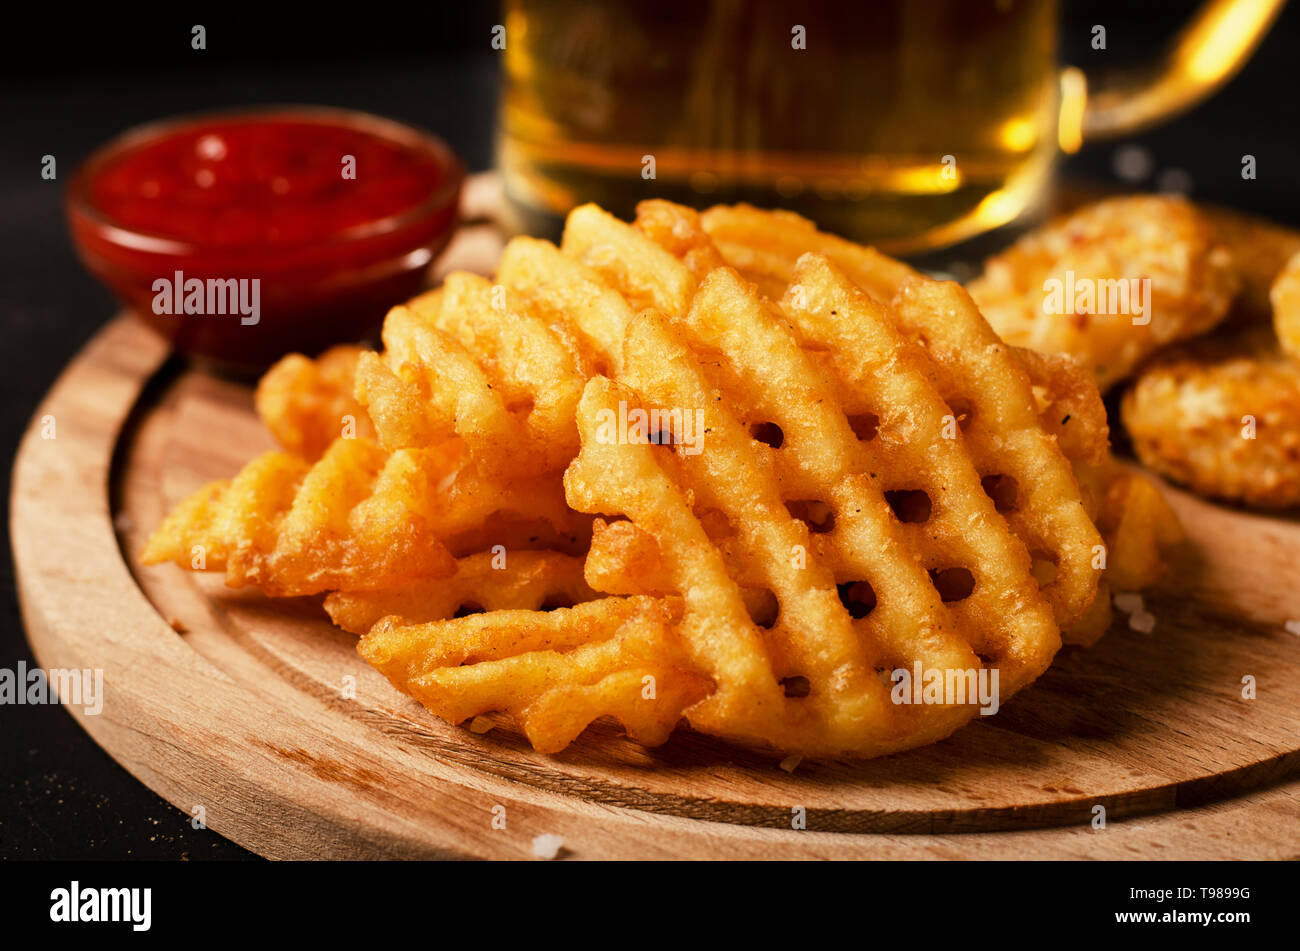 Crispy potato waffles fries, wavy, crinkle cut, criss cross cries with on a cutting board Stock Photo